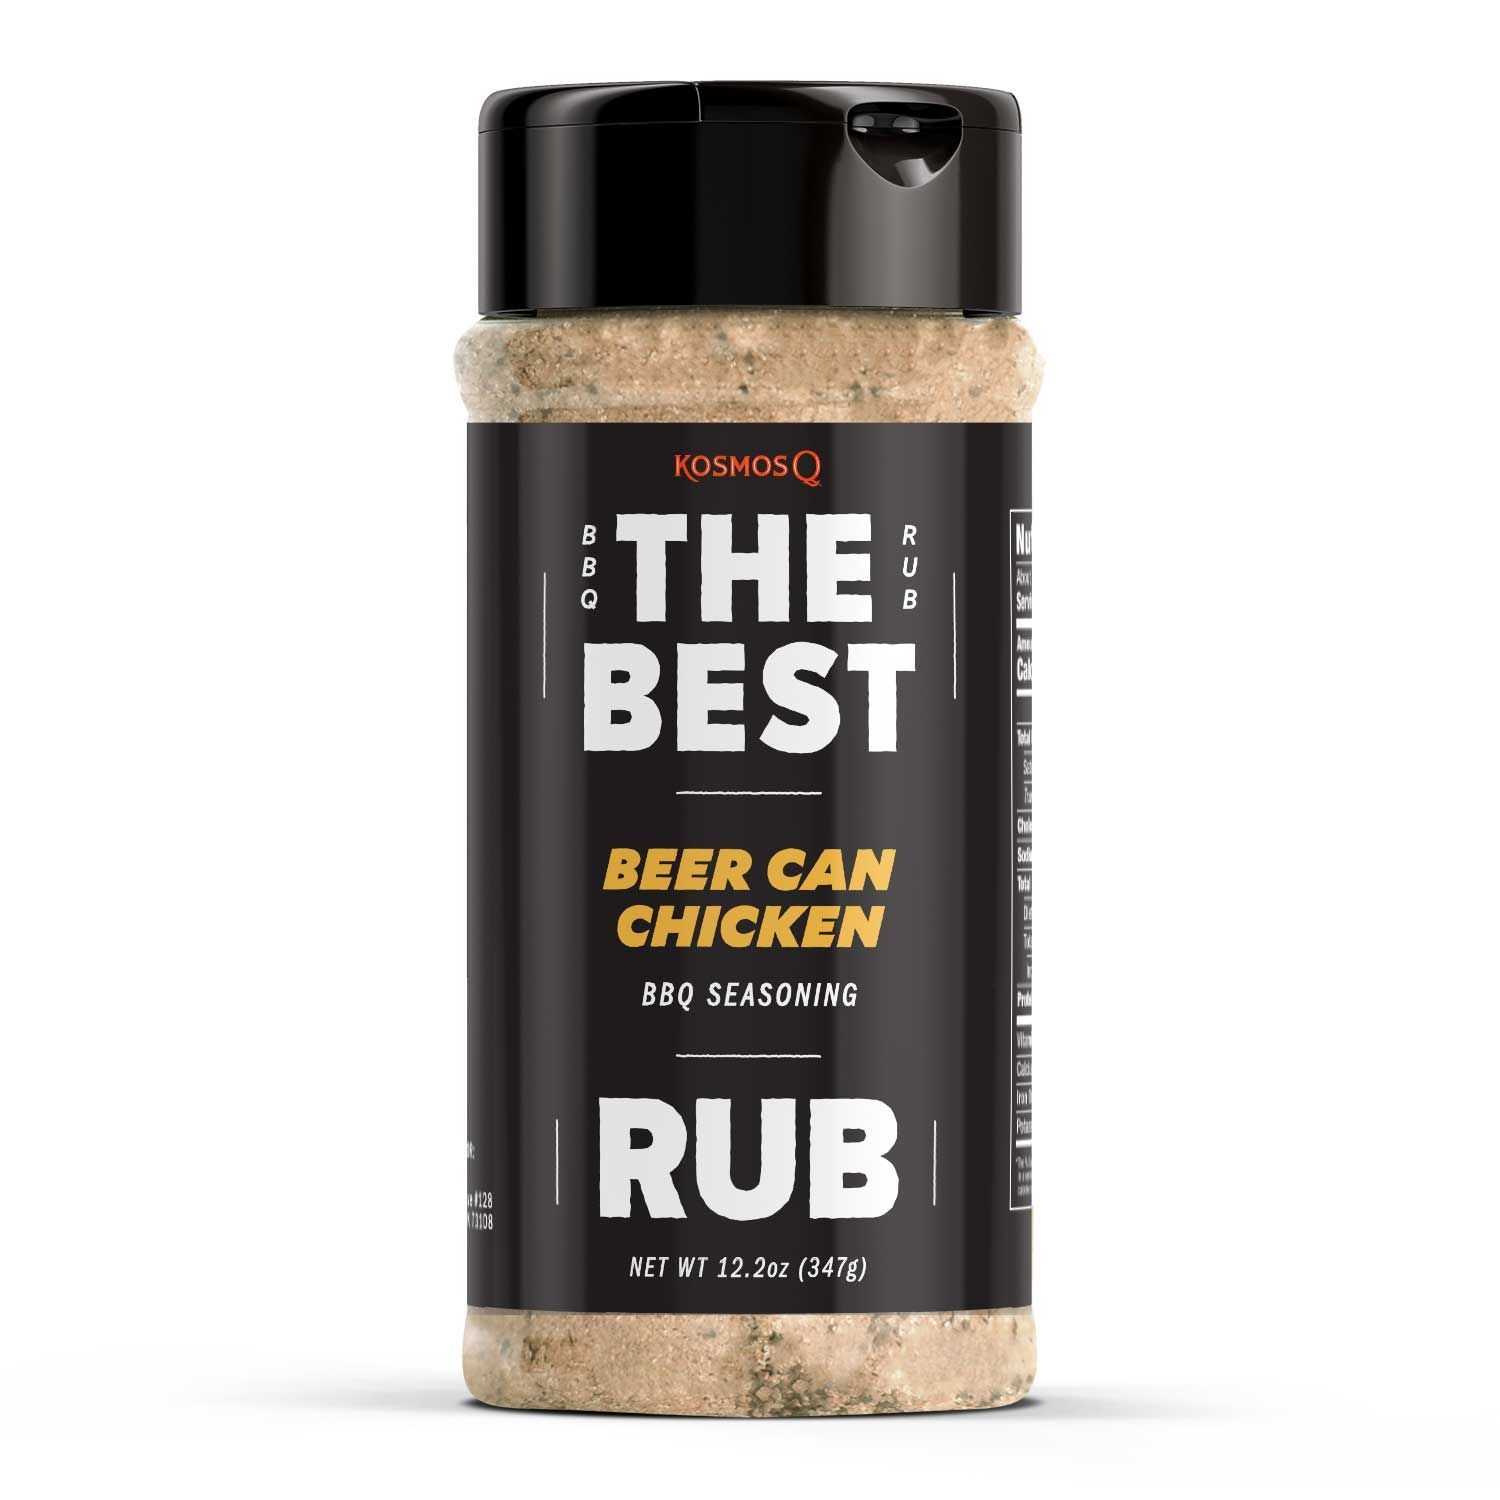 Kosmo's Q Barbecue Rubs The Best Beer Can Chicken Rub